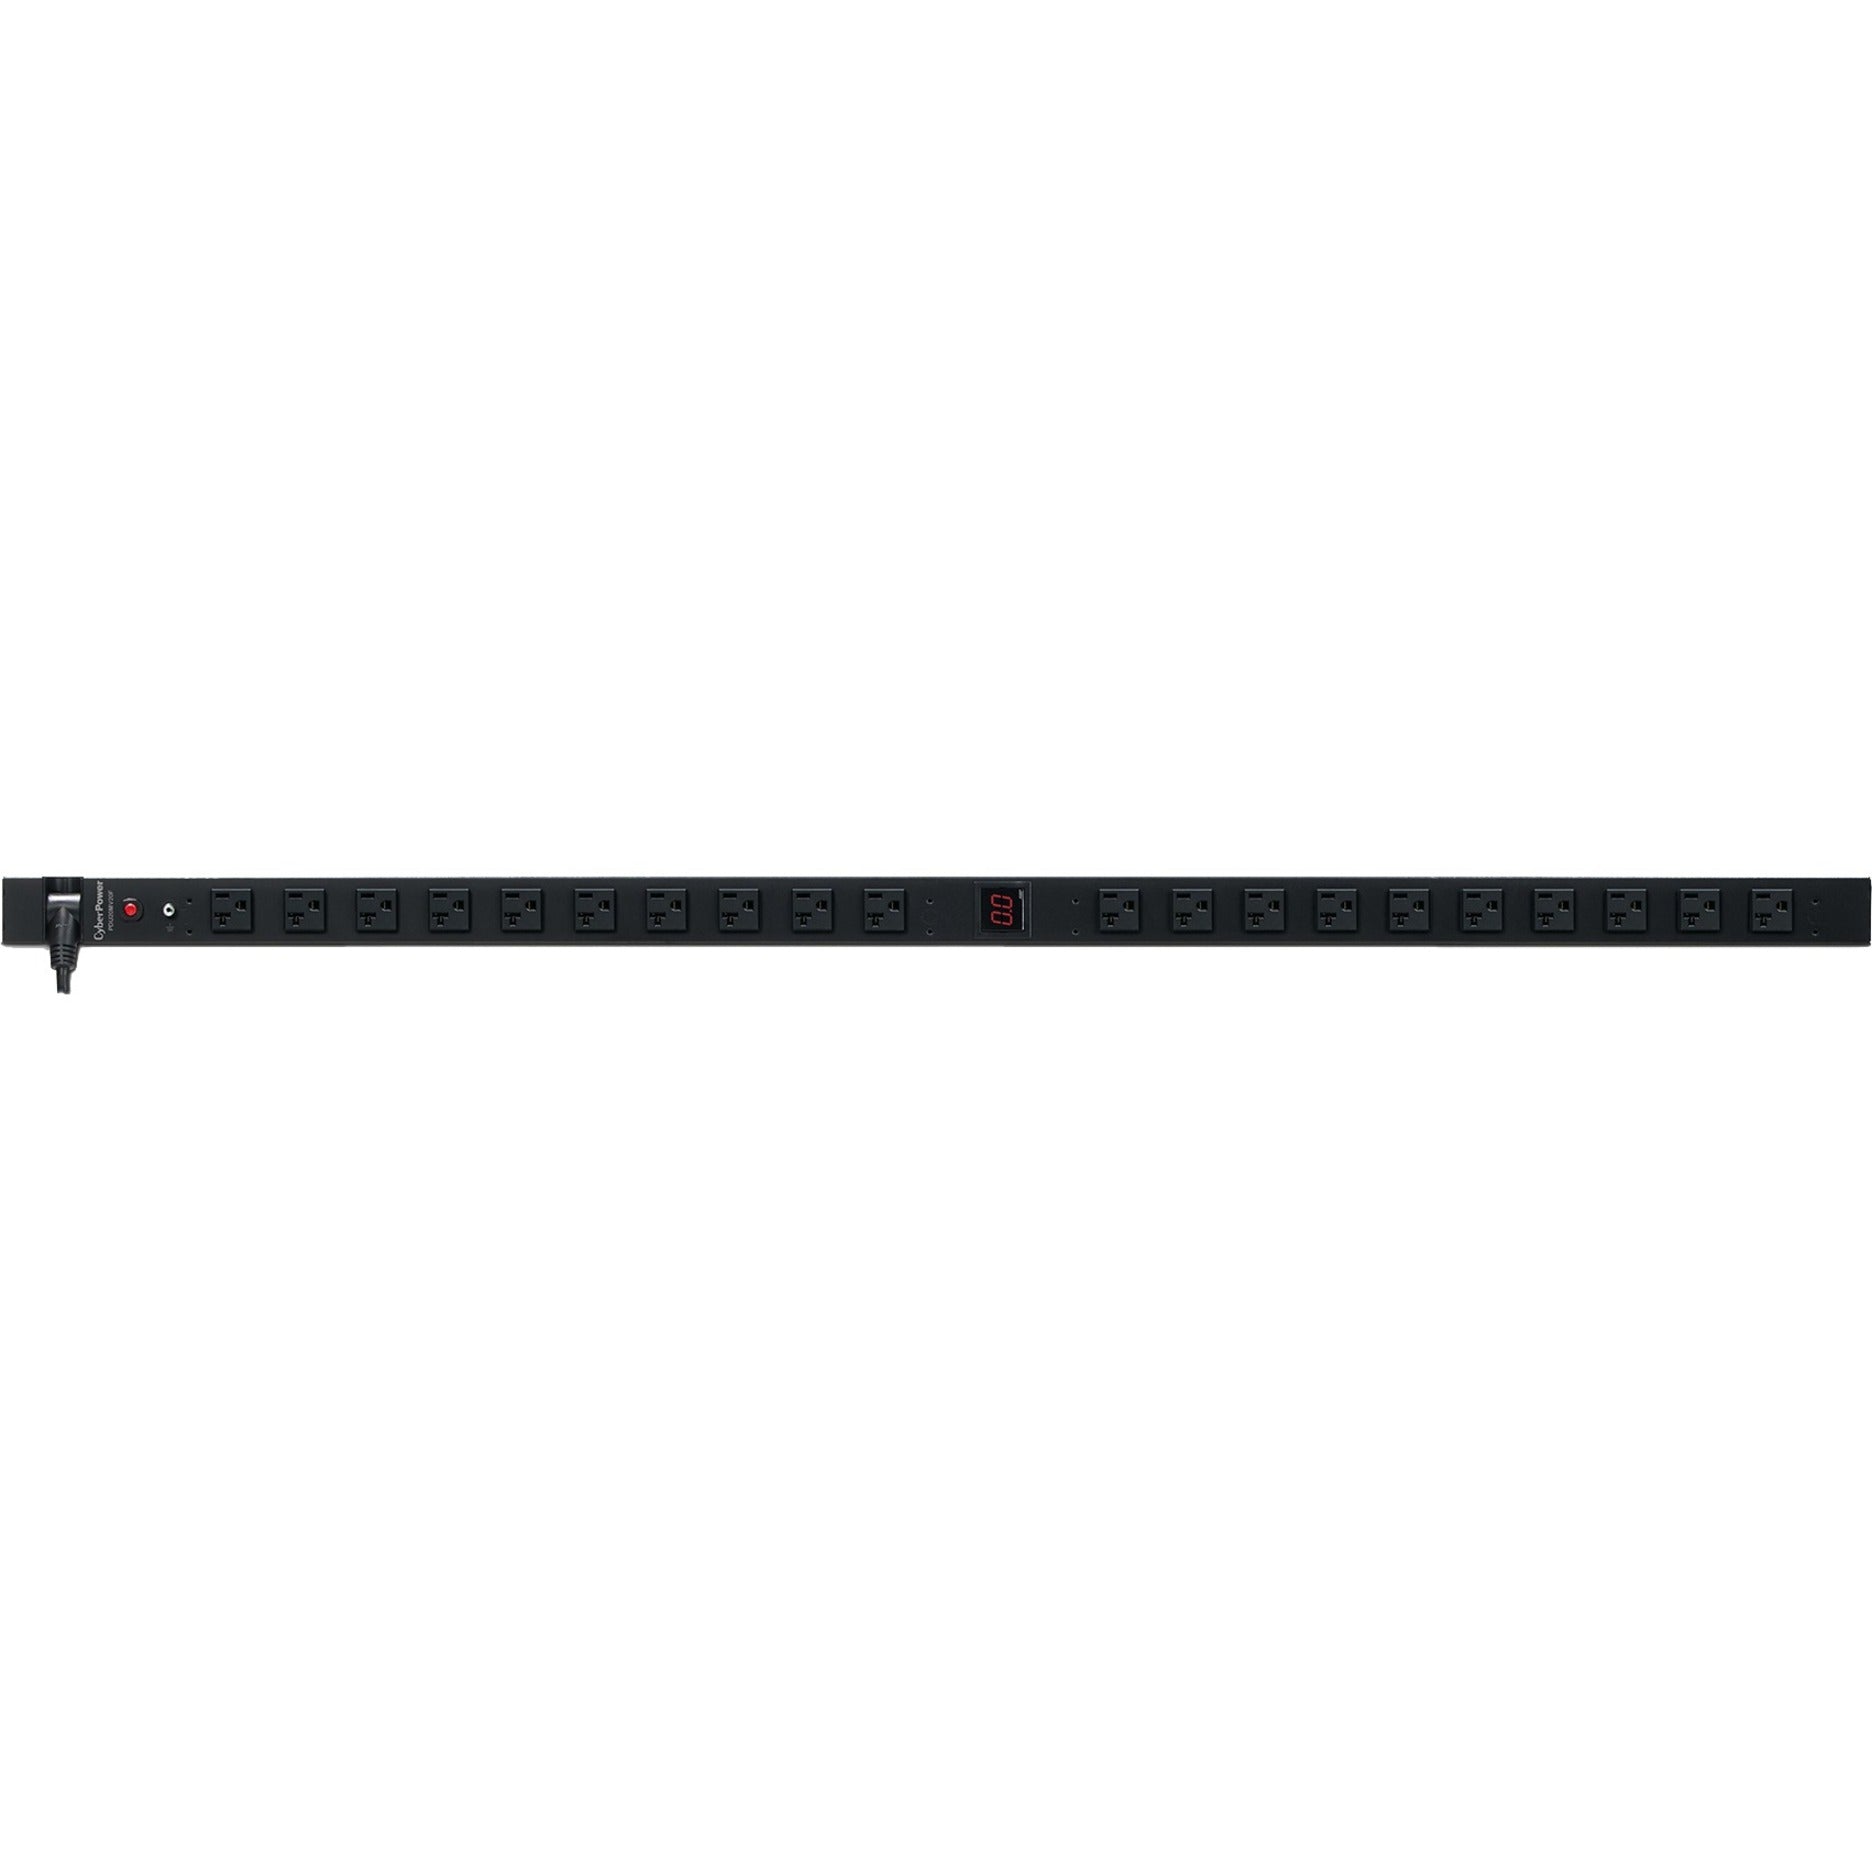 CyberPower PDU20MV20F 20-Outlets PDU, 100-125VAC 20A Metered Power Distribution Unit